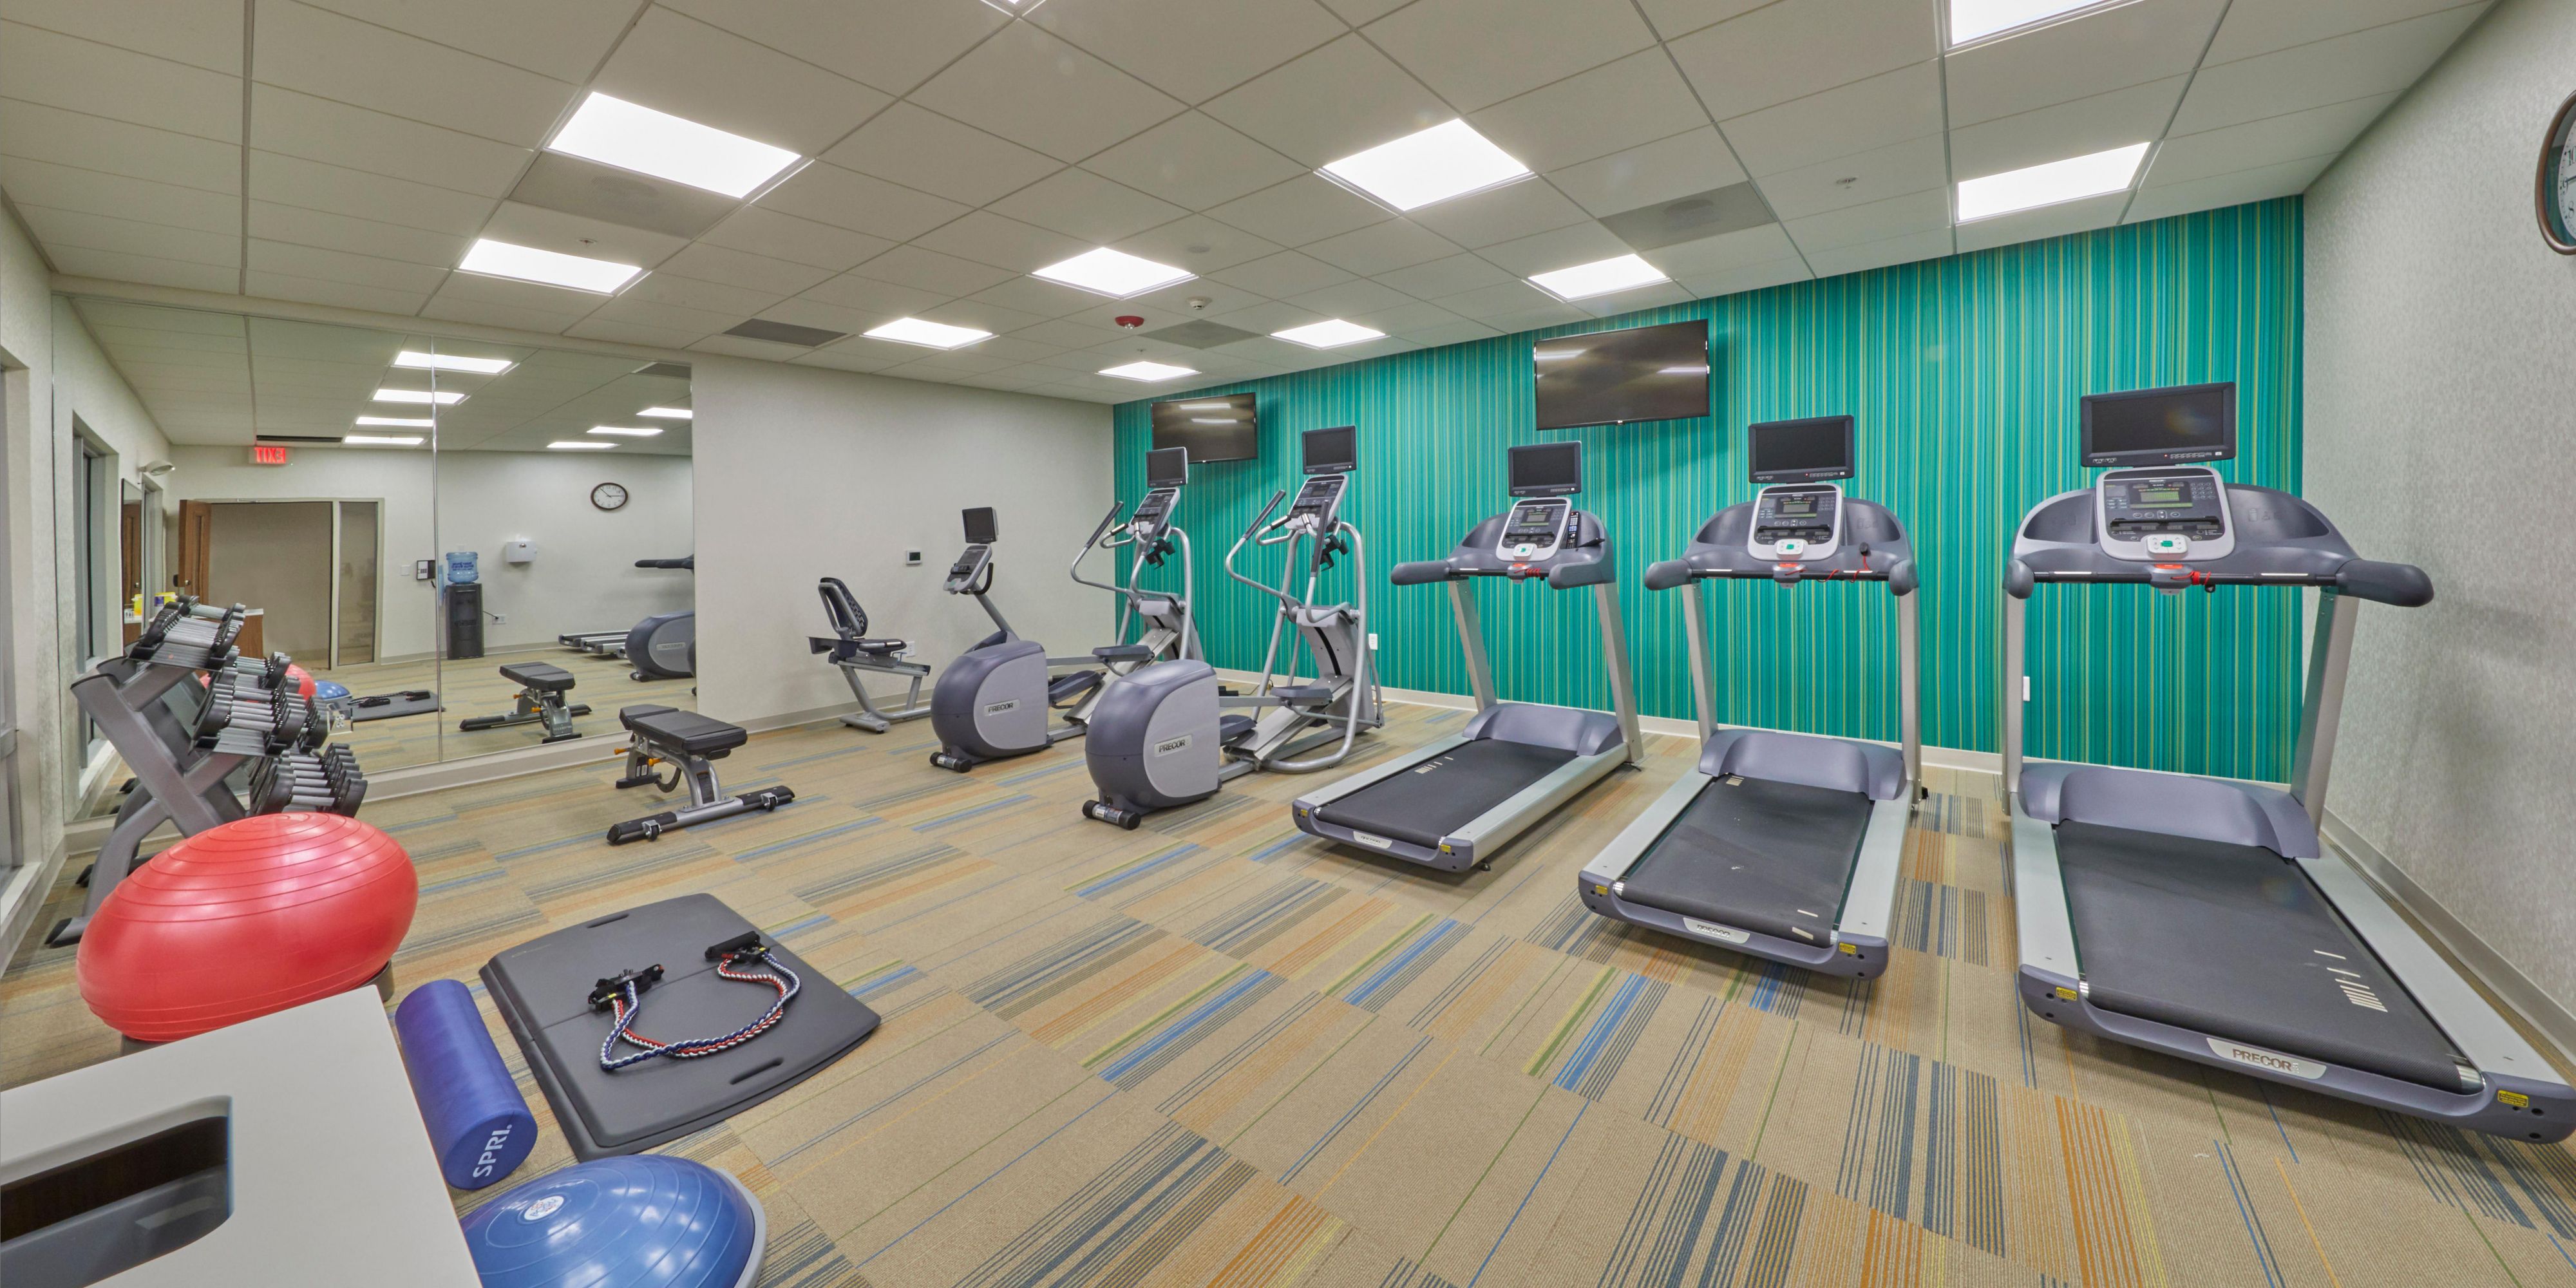 Our fitness center is a quick and convenient alternative to local gyms during your Hermiston Oregon stay.